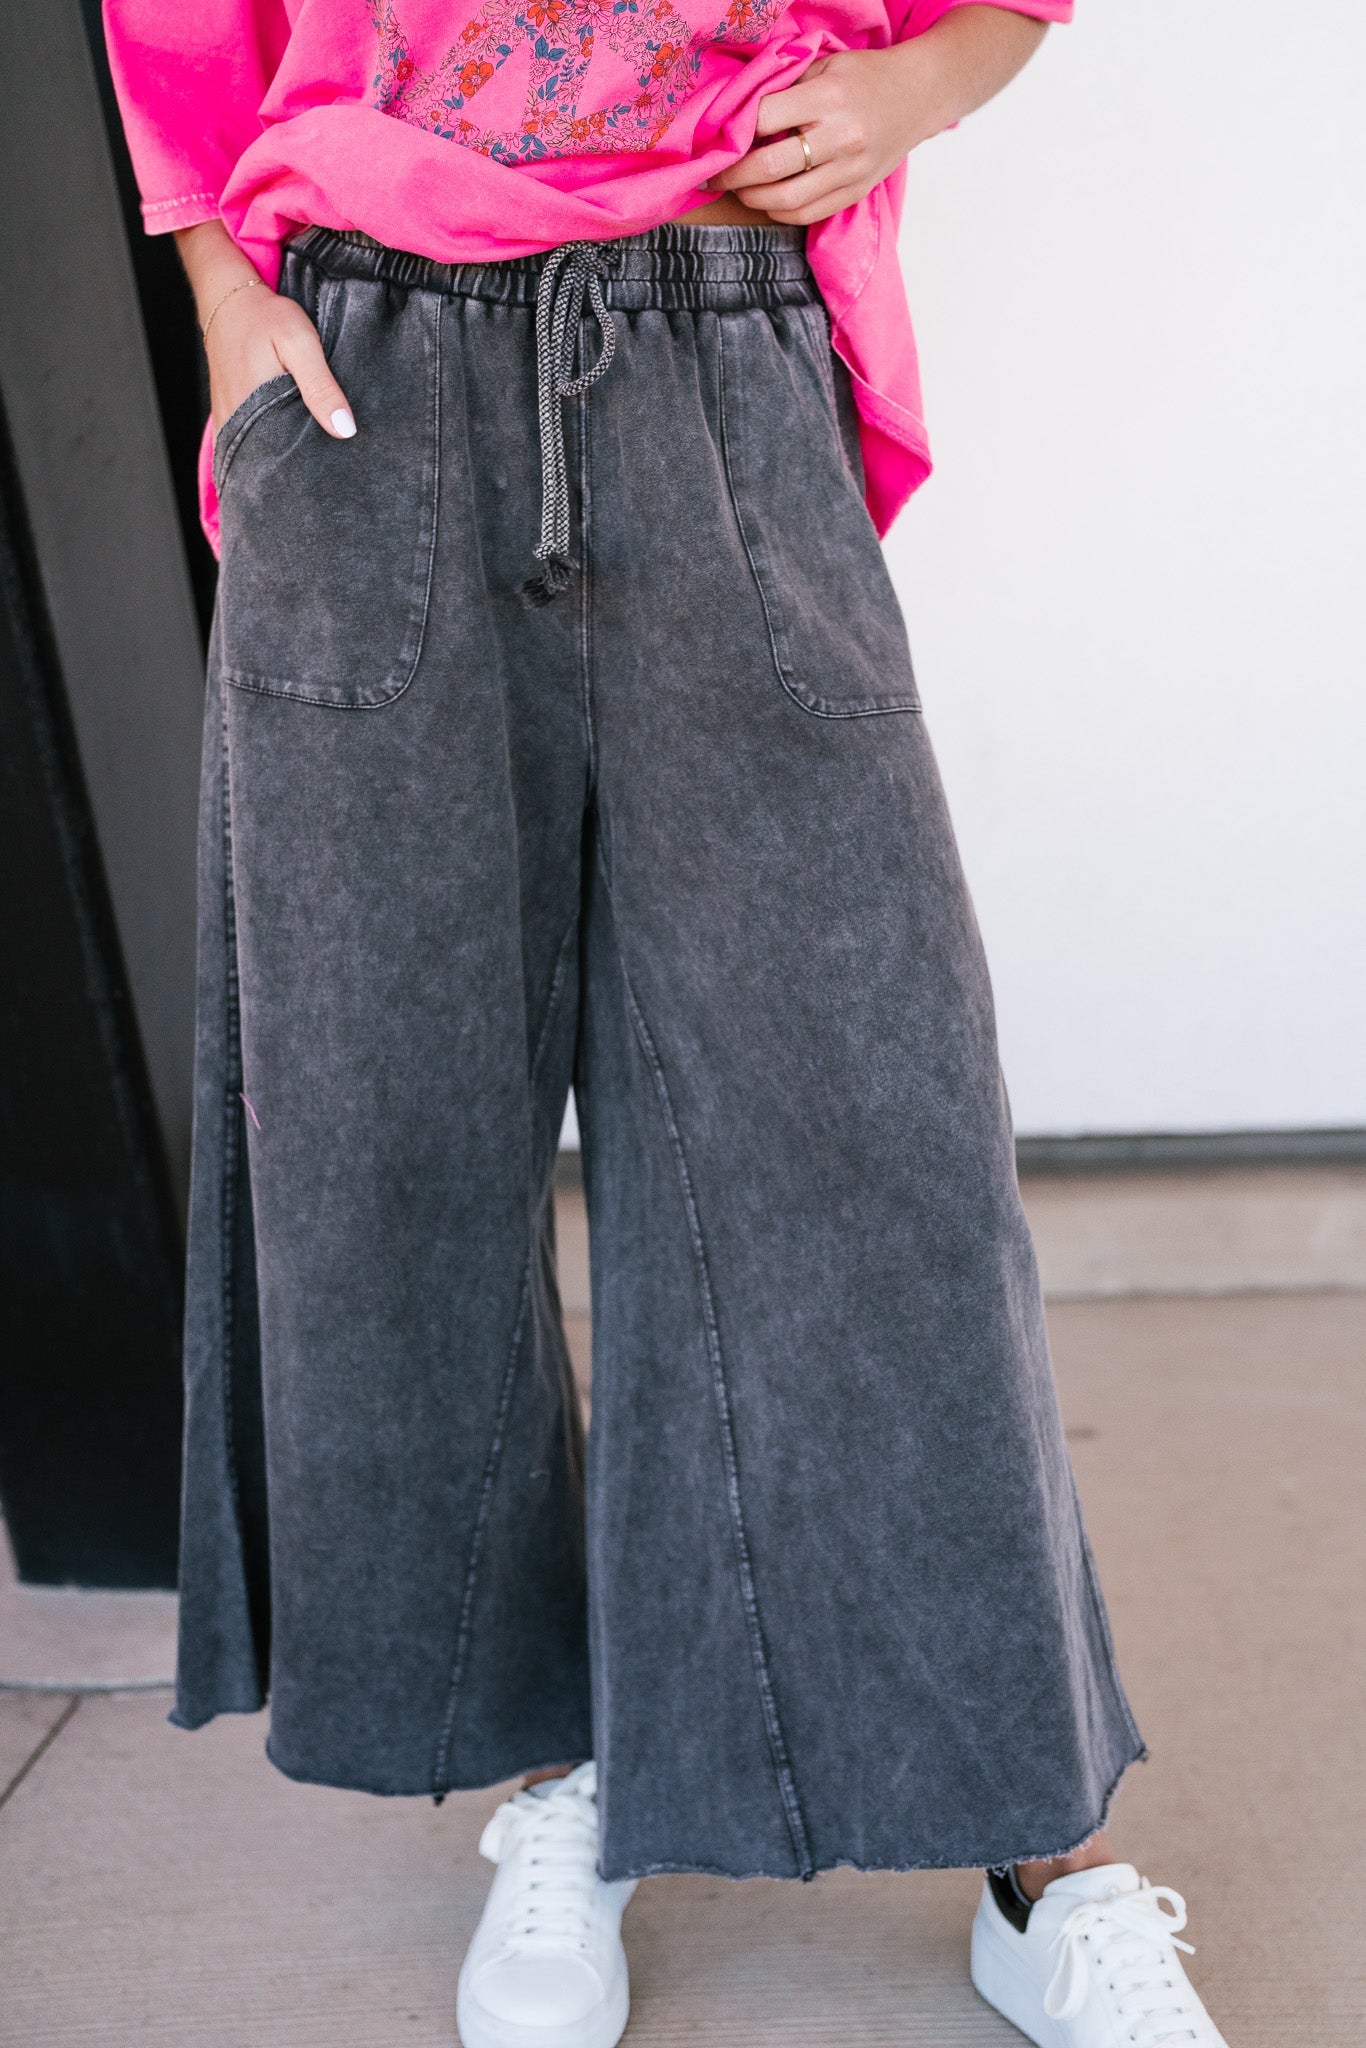 Can't Be Matched Mineral Wash Wide Leg Pants - Faded Black